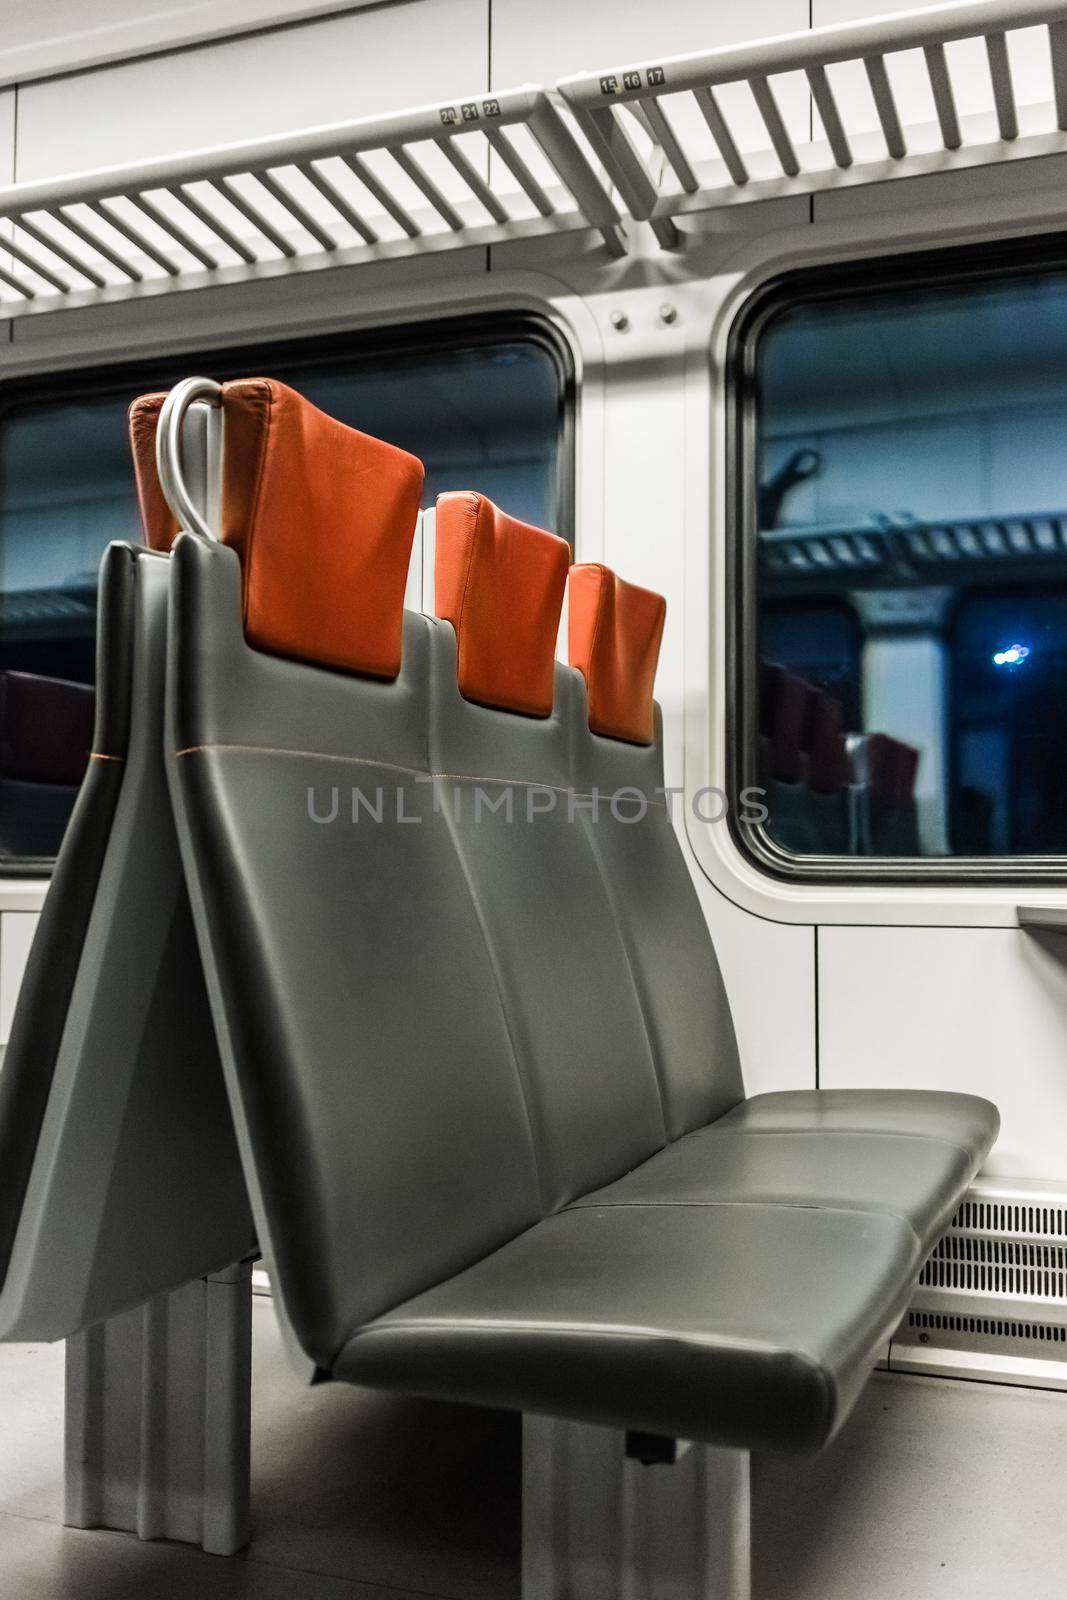 Electric train stadler modern interior with leather seats by AYDO8